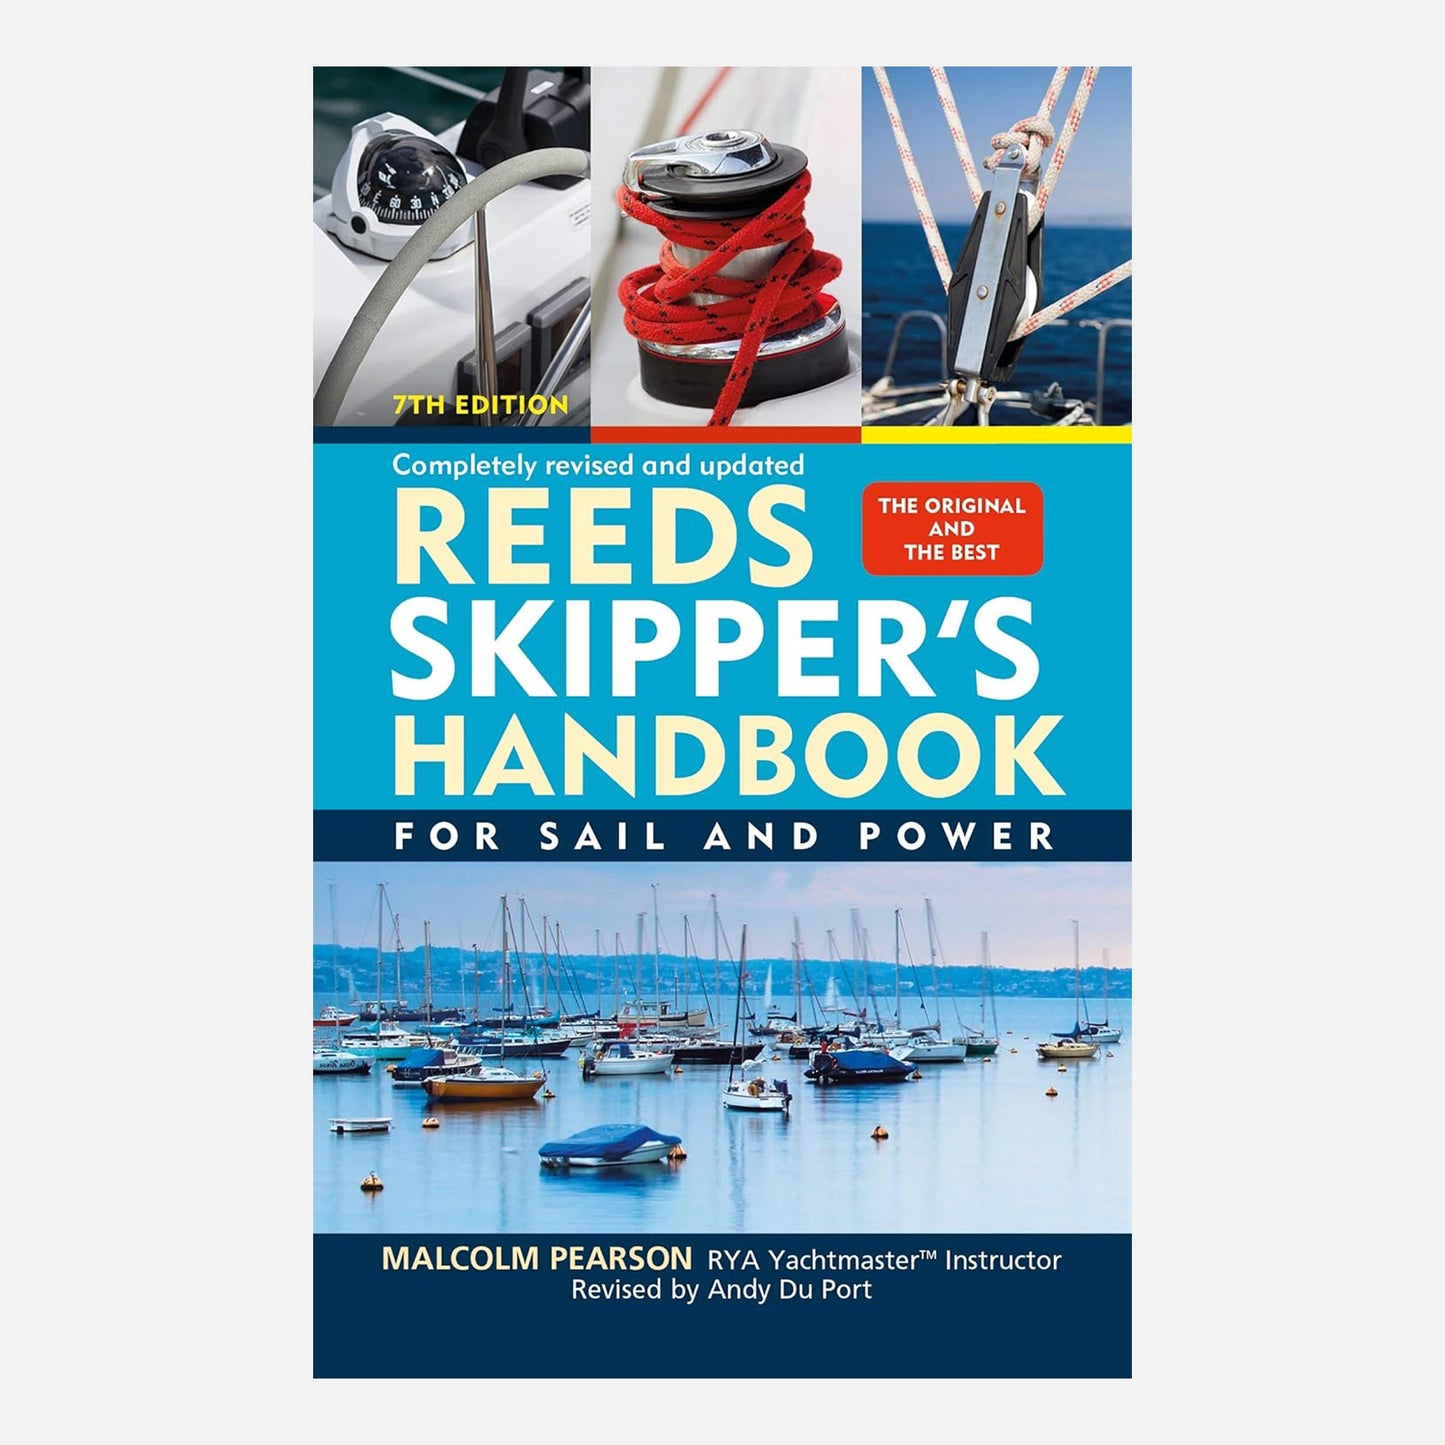 7th Edition, Completely revised & Updated, the original and the best.Reeds Skipper's Handbook: For Sail and Power. By Malcolm Pearson., RYA Yachtmaster Instructer. Revised by Andy Du Port. Sailing boats on calm sea with additional ropes pulley and wheel images.